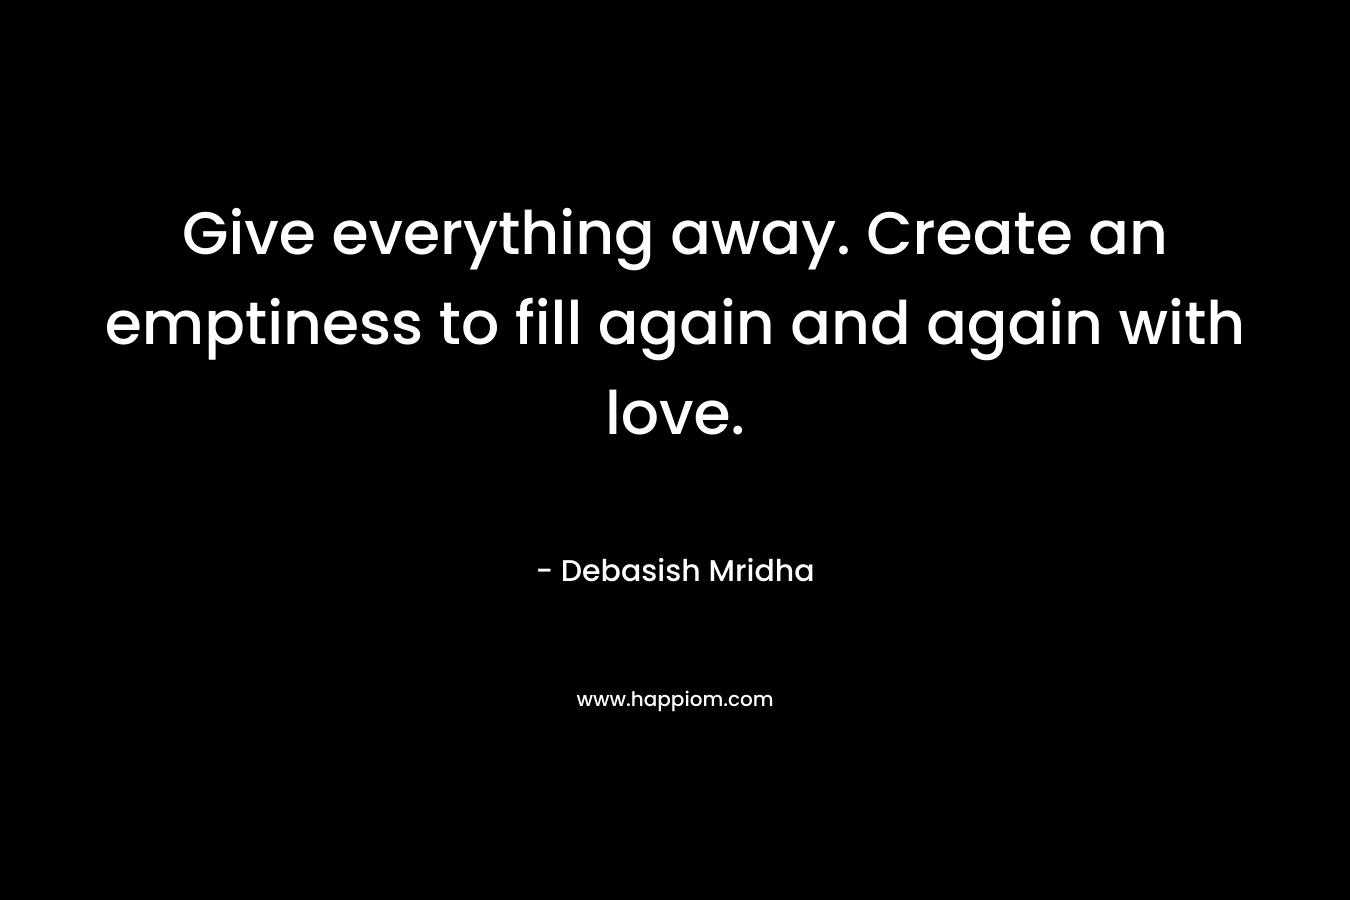 Give everything away. Create an emptiness to fill again and again with love.